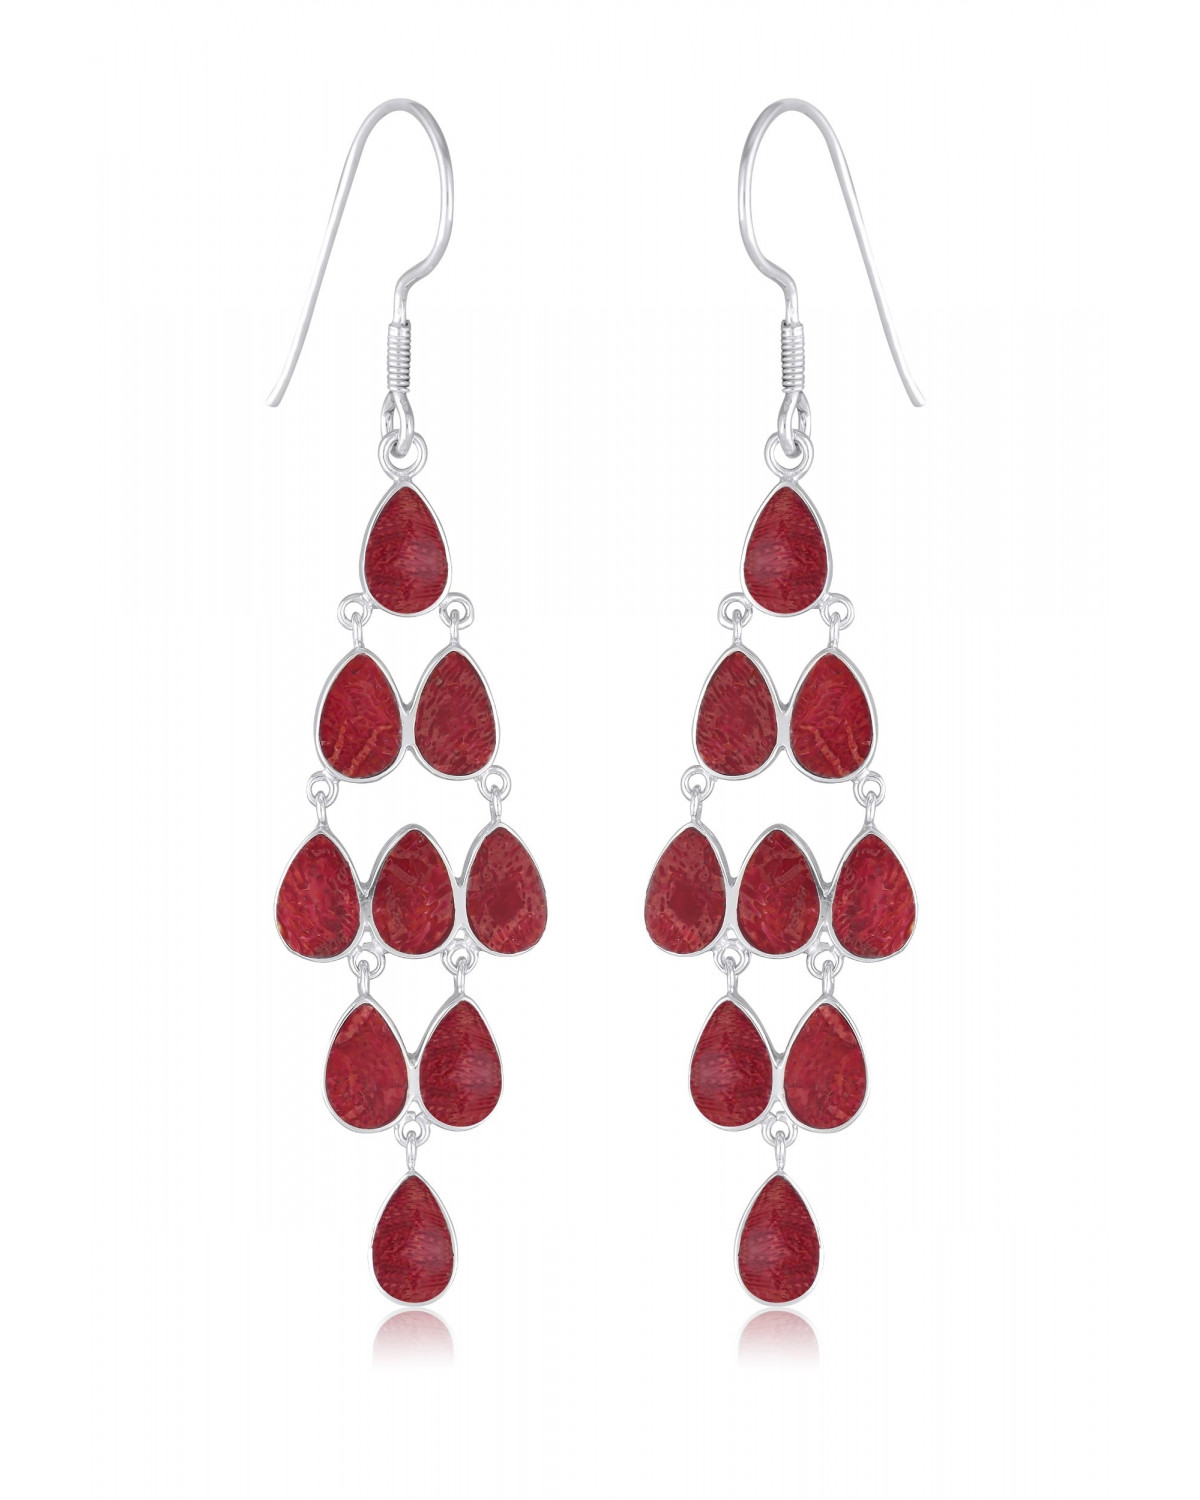 Red Coral Waterfall Earrings with Sterling Silver 925